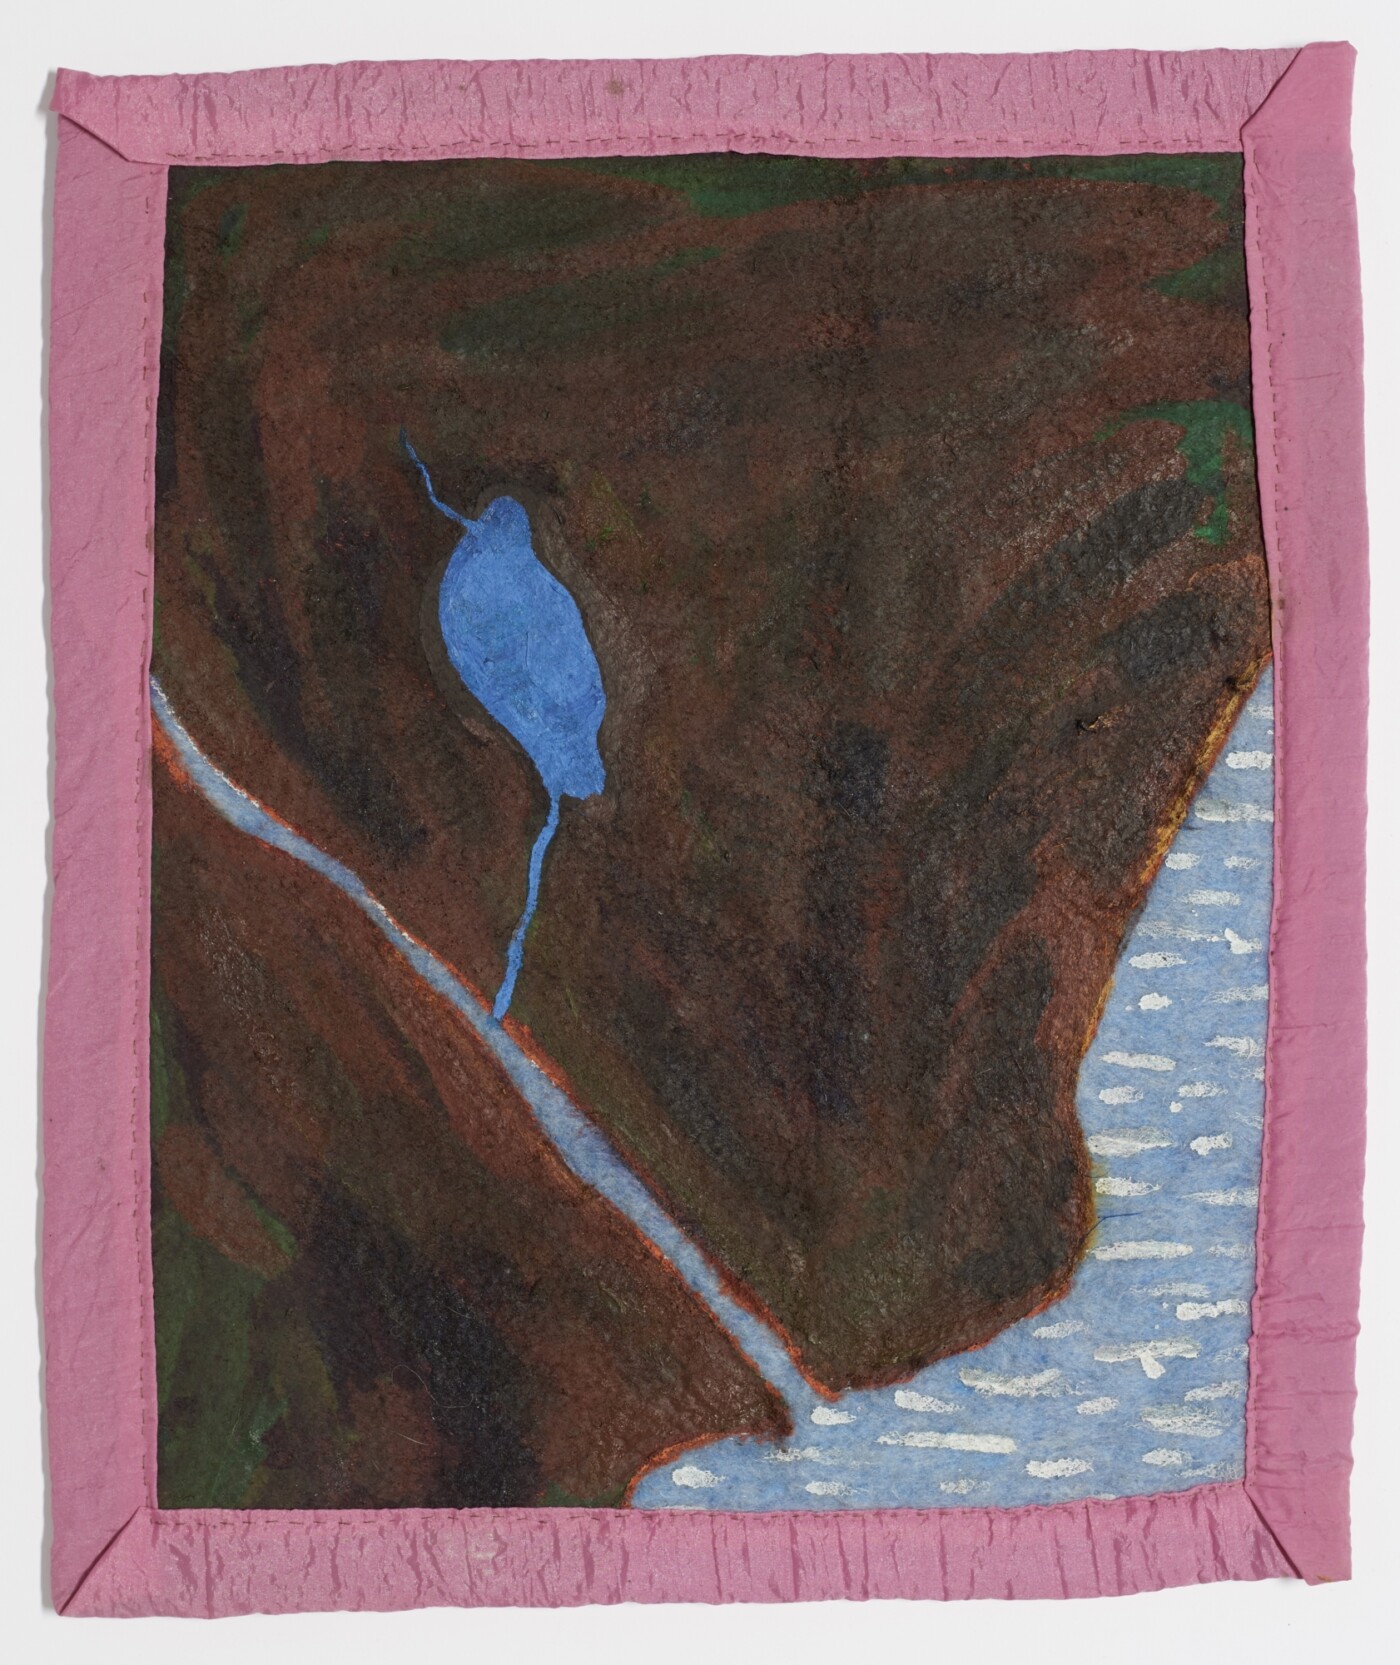 A light blue blanket with pink borders, hung vertically on a wall, shows the contours of a landscape painted onto the blanket from an overhead perspective. Left of center, a lake is painted in deep blue. From the southern tip of the lake, a river emerges. This river joins a wider one that runs diagonally from the left side of the composition towards the bottom, flowing into a bay depicted in the bottom right-hand corner of the blanket. The bay is unpainted, displaying the blue of the fabric support. Short, horizontal marks of white paint suggest the caps of waves.